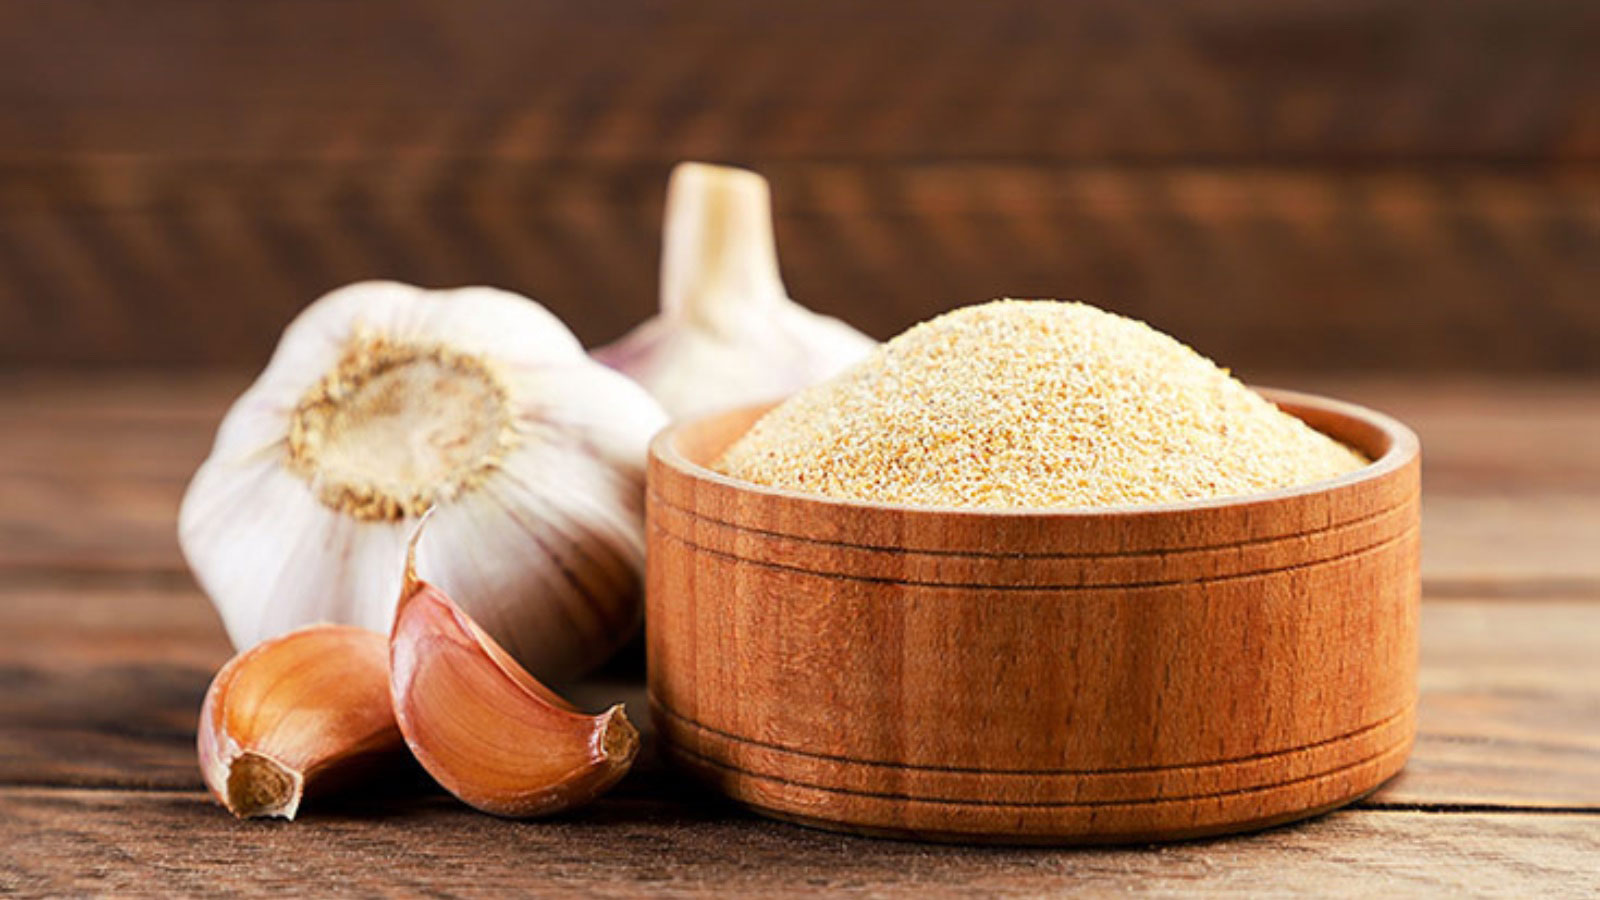 A wood bowl filled with garlic powder. A head of garlic and some cloves lay next to it.